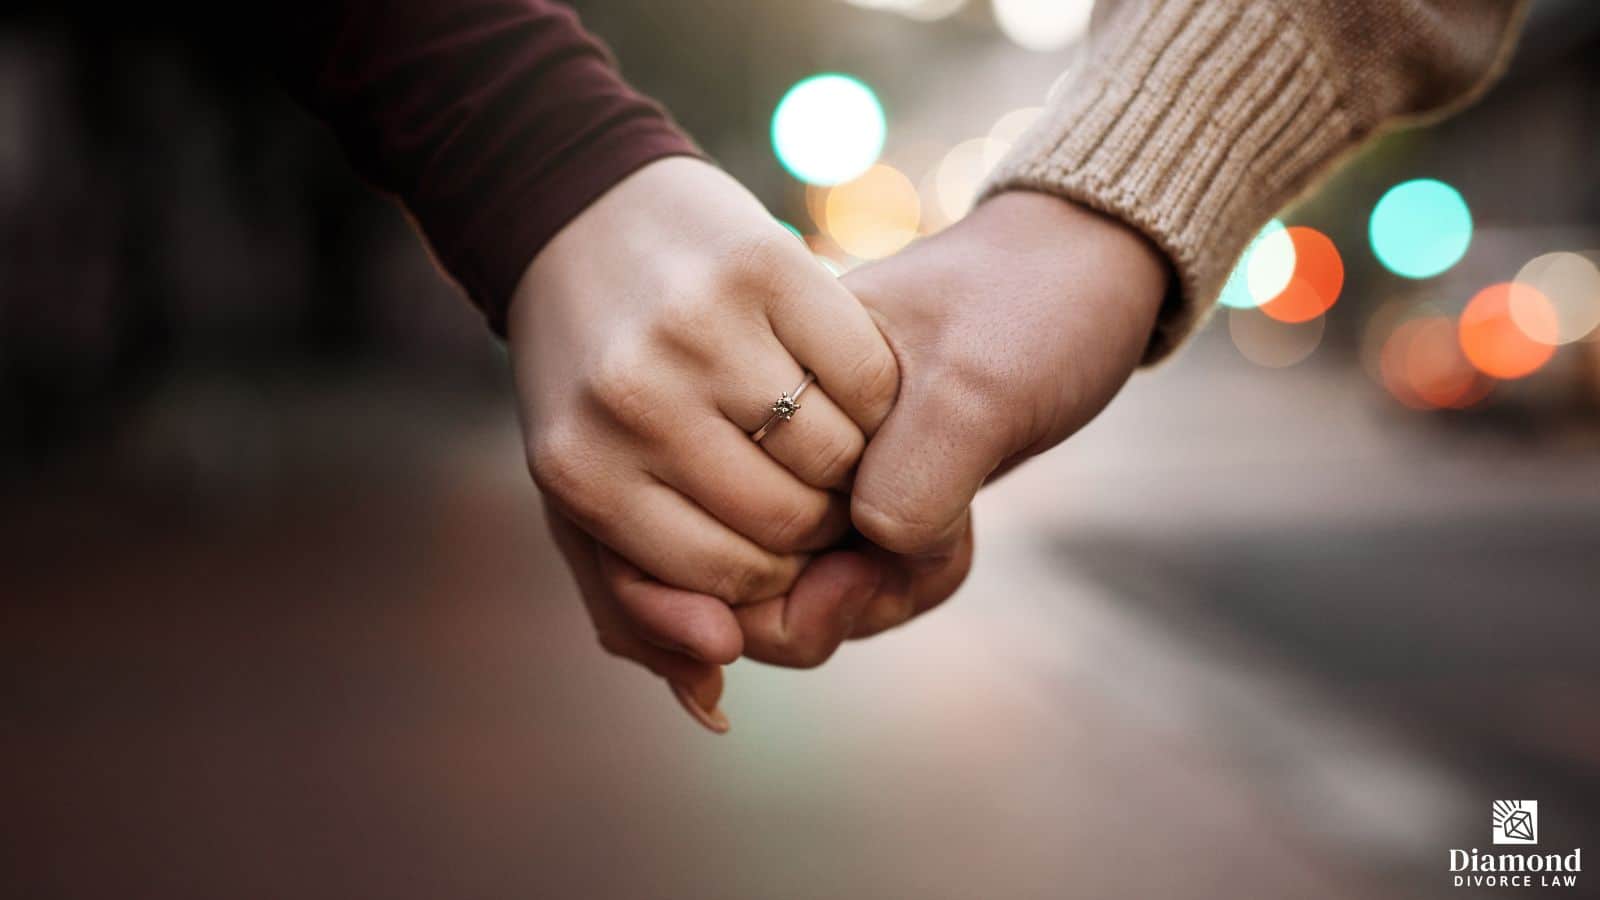 A man and a woman holding hands, she has a wedding ring on.